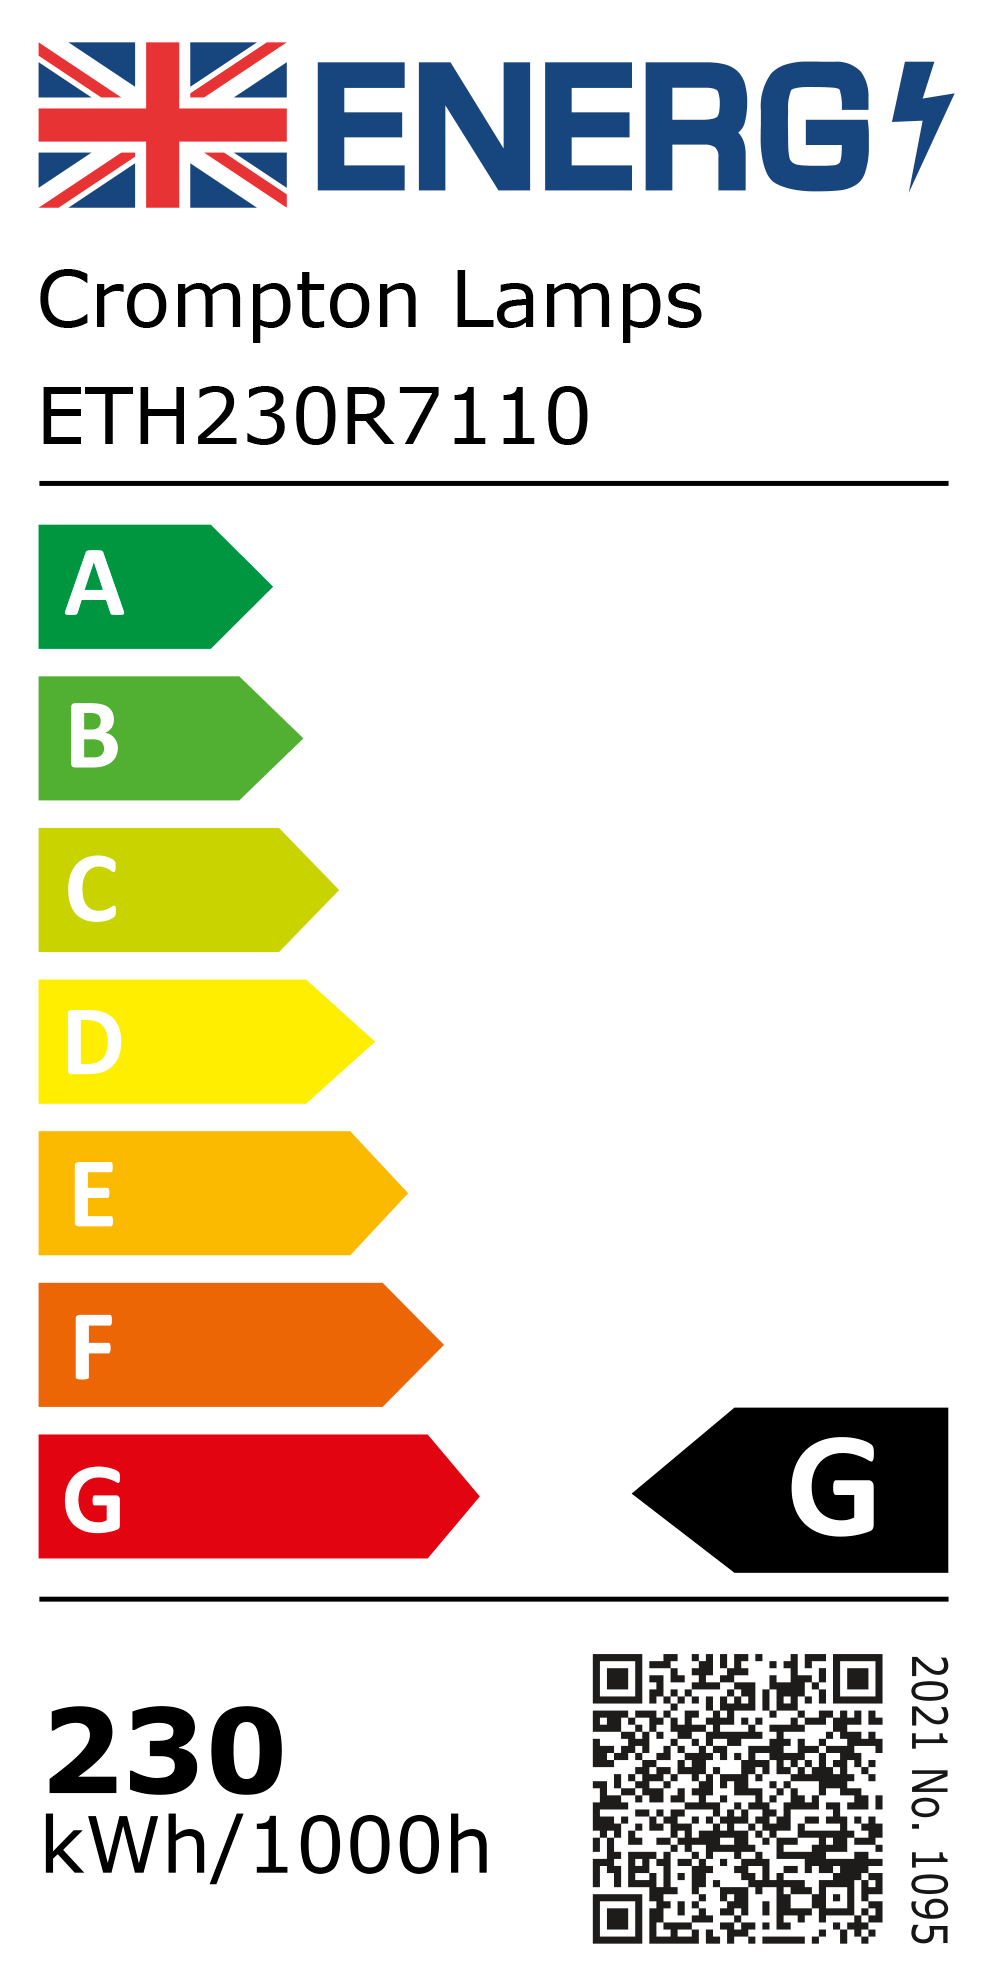 New 2021 Energy Rating Label: Stock Code ETH230R7110